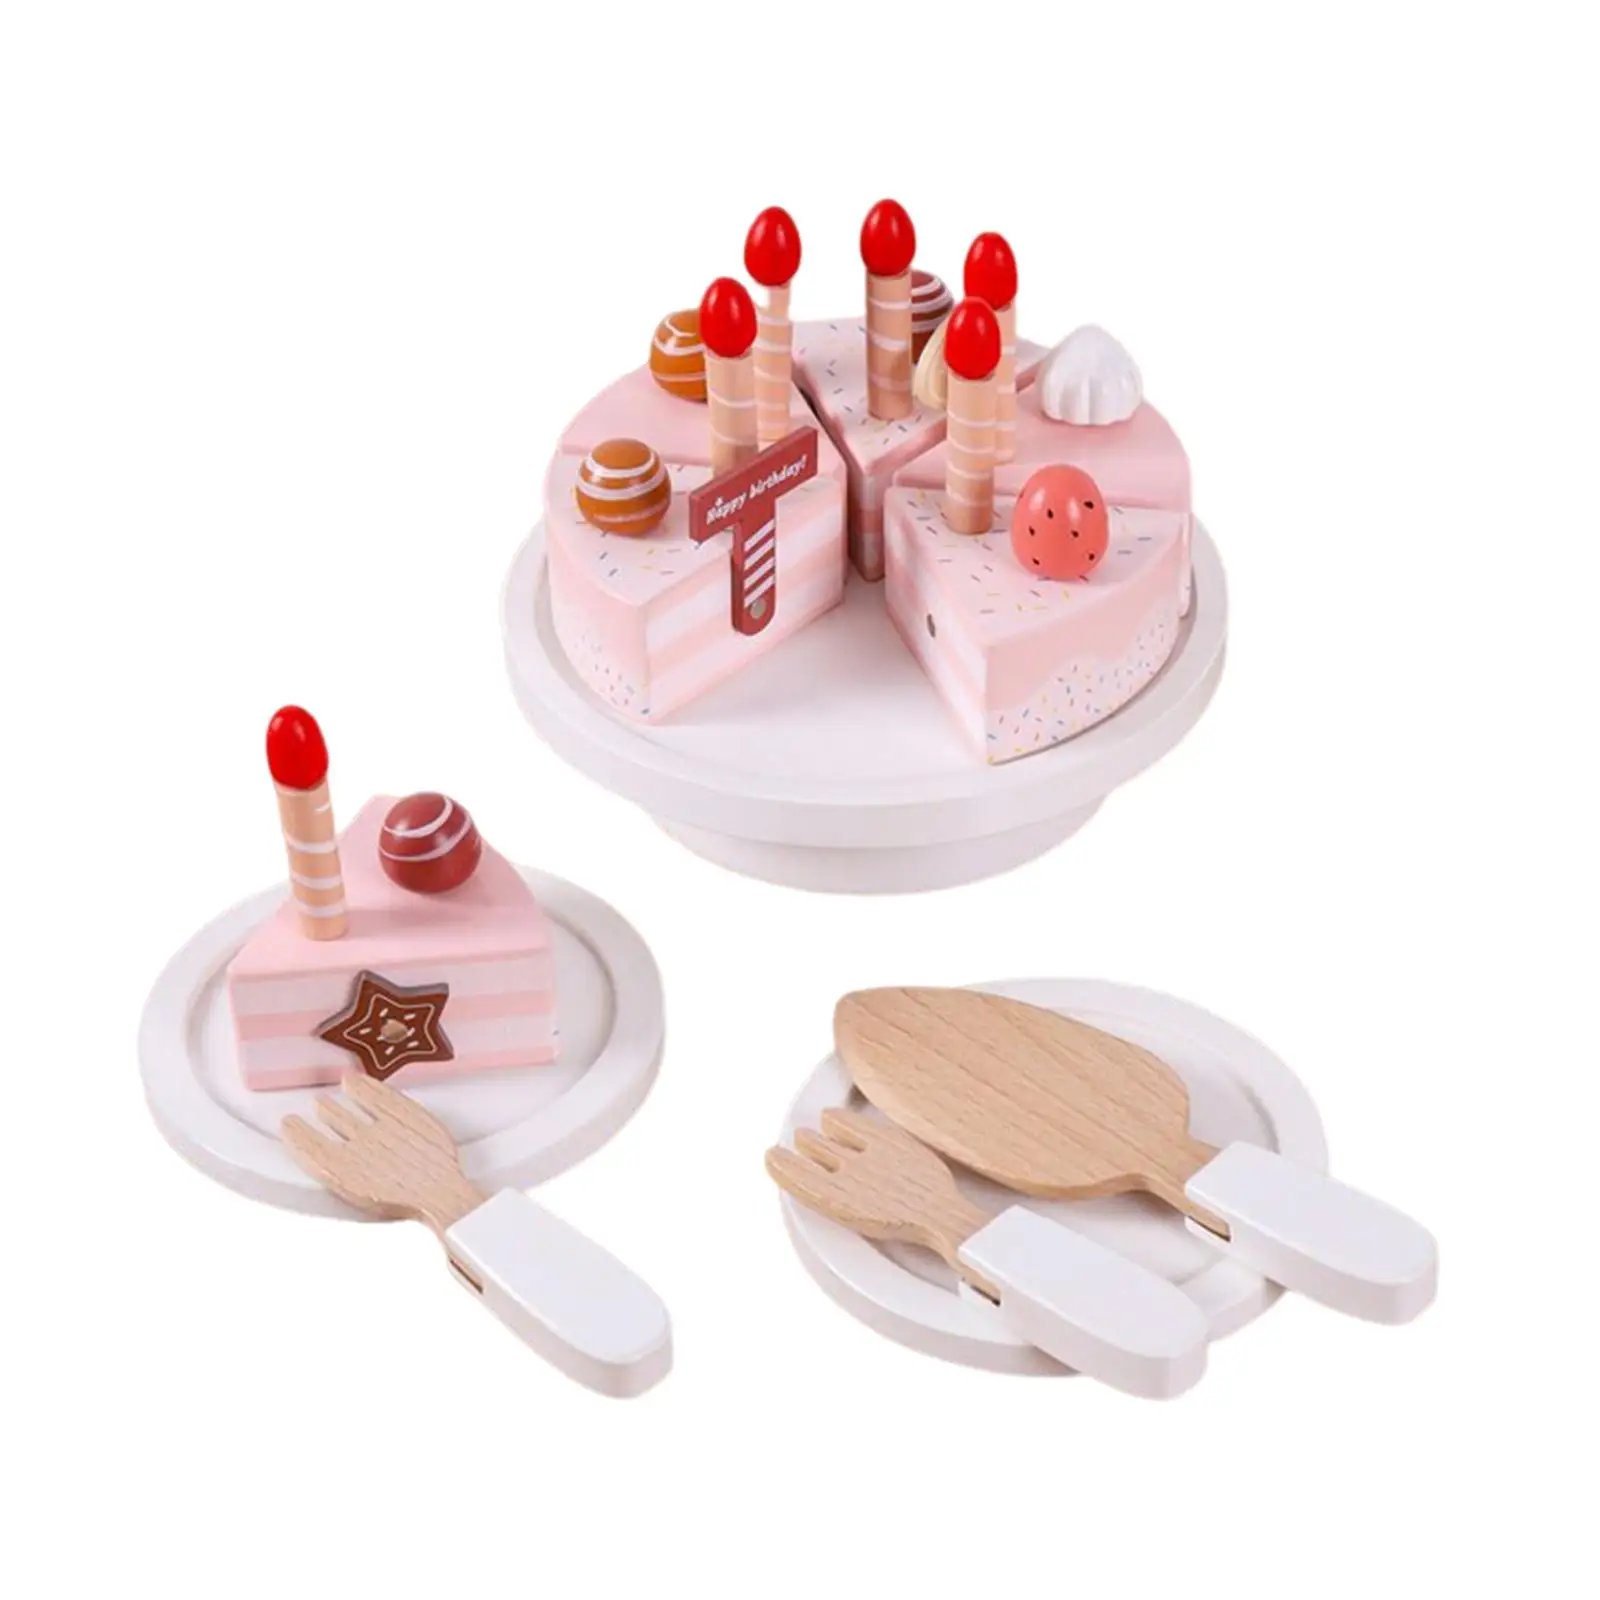 Simulation Wooden Cake Toys Role Play Toys Montessori Toys DIY Pretend Play for Ages 3 Years and up Girls Kids Birthday Gifts